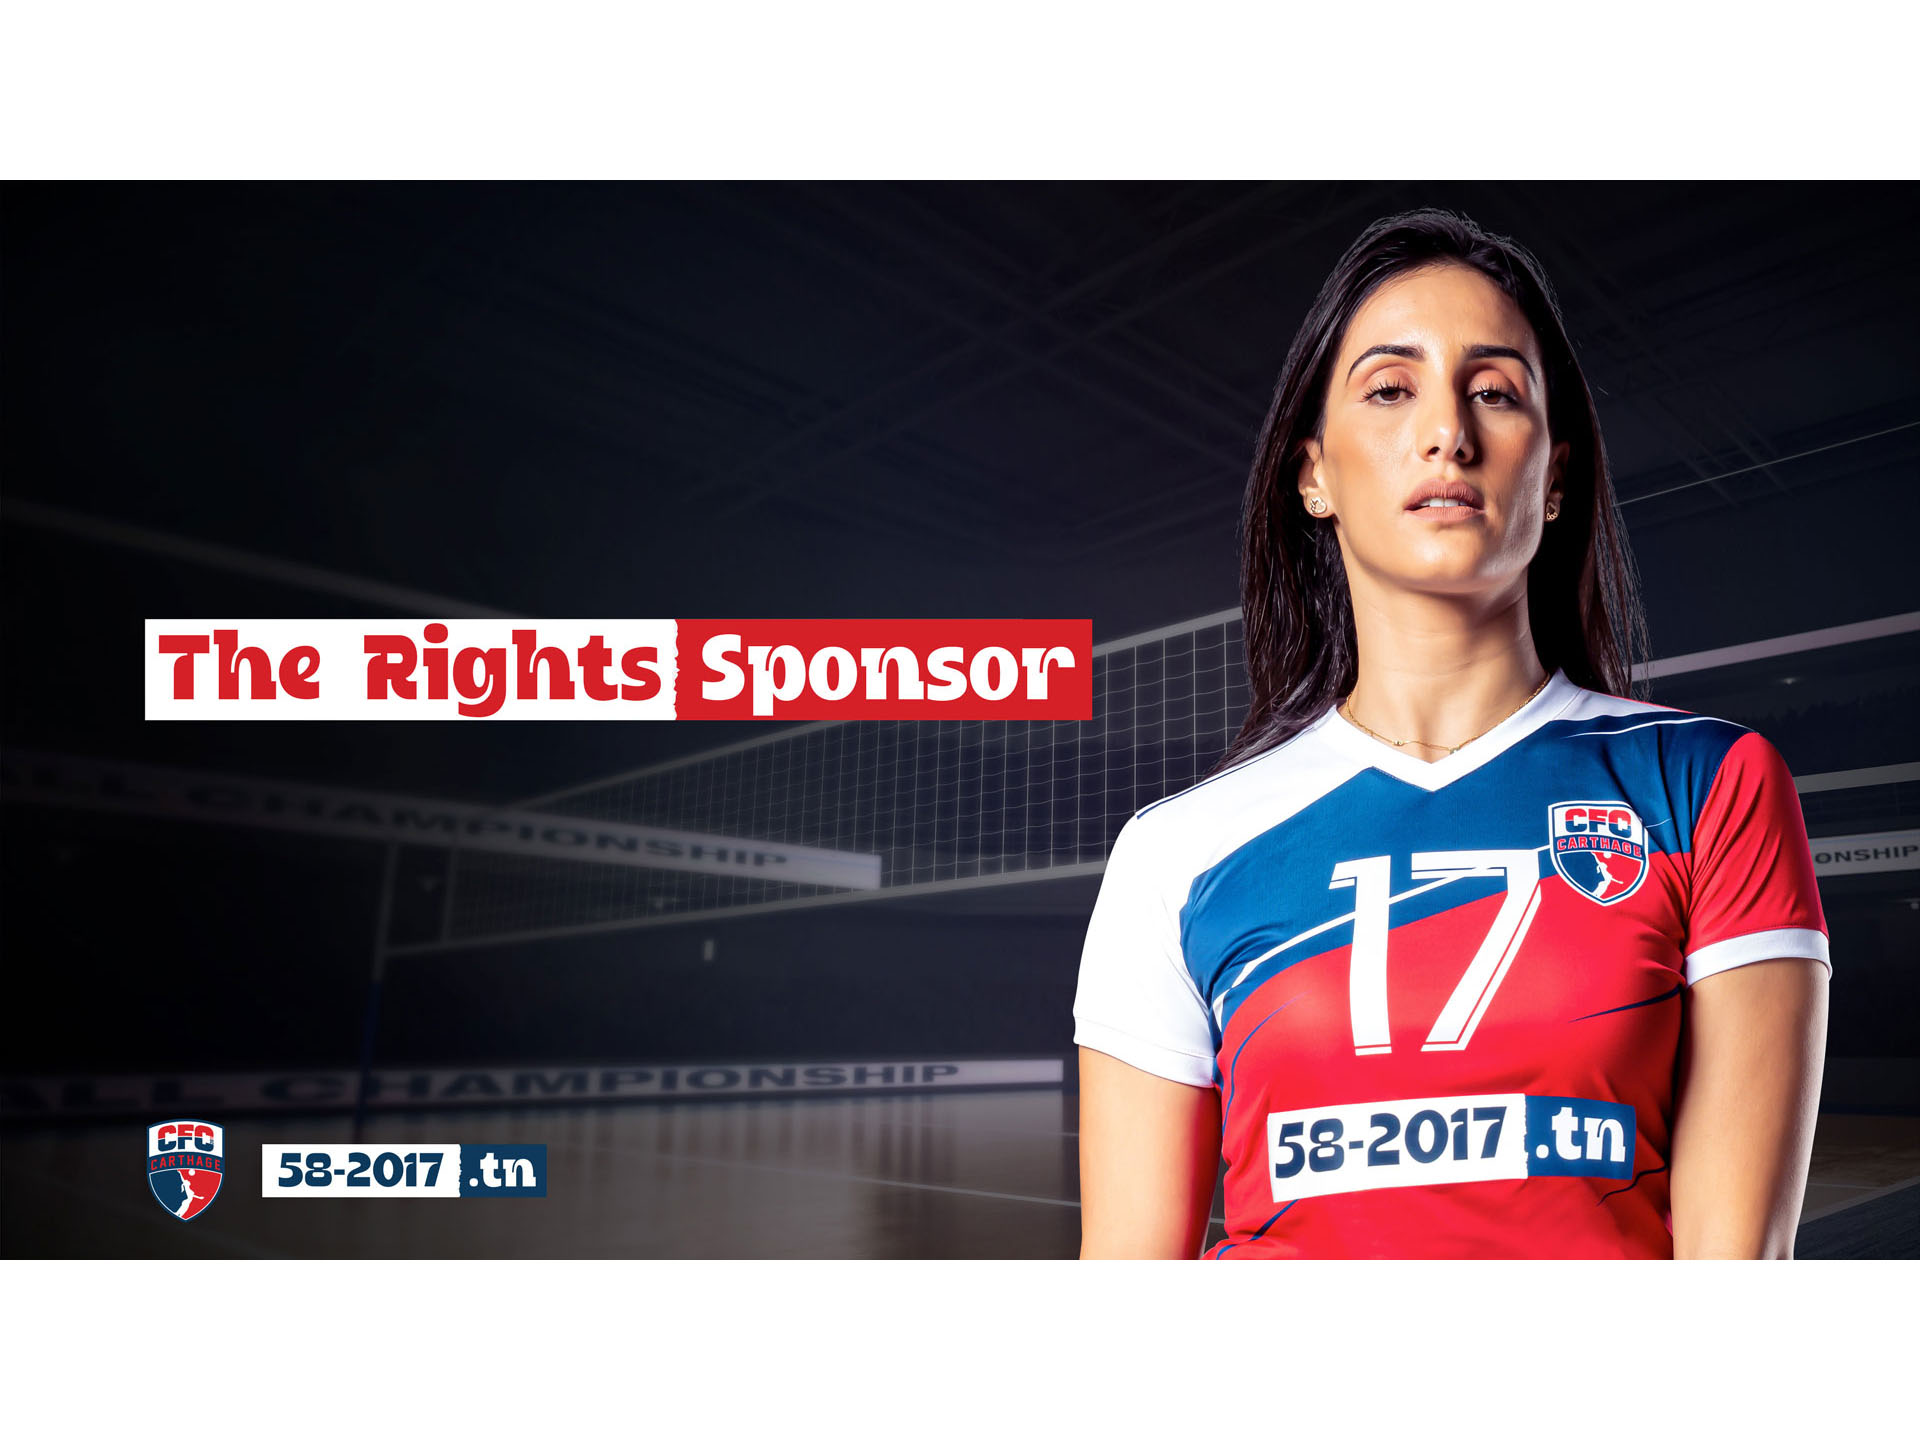 A law on women’s rights was picked as the sponsor of CFC, Tunisia's leading women Volleyball team